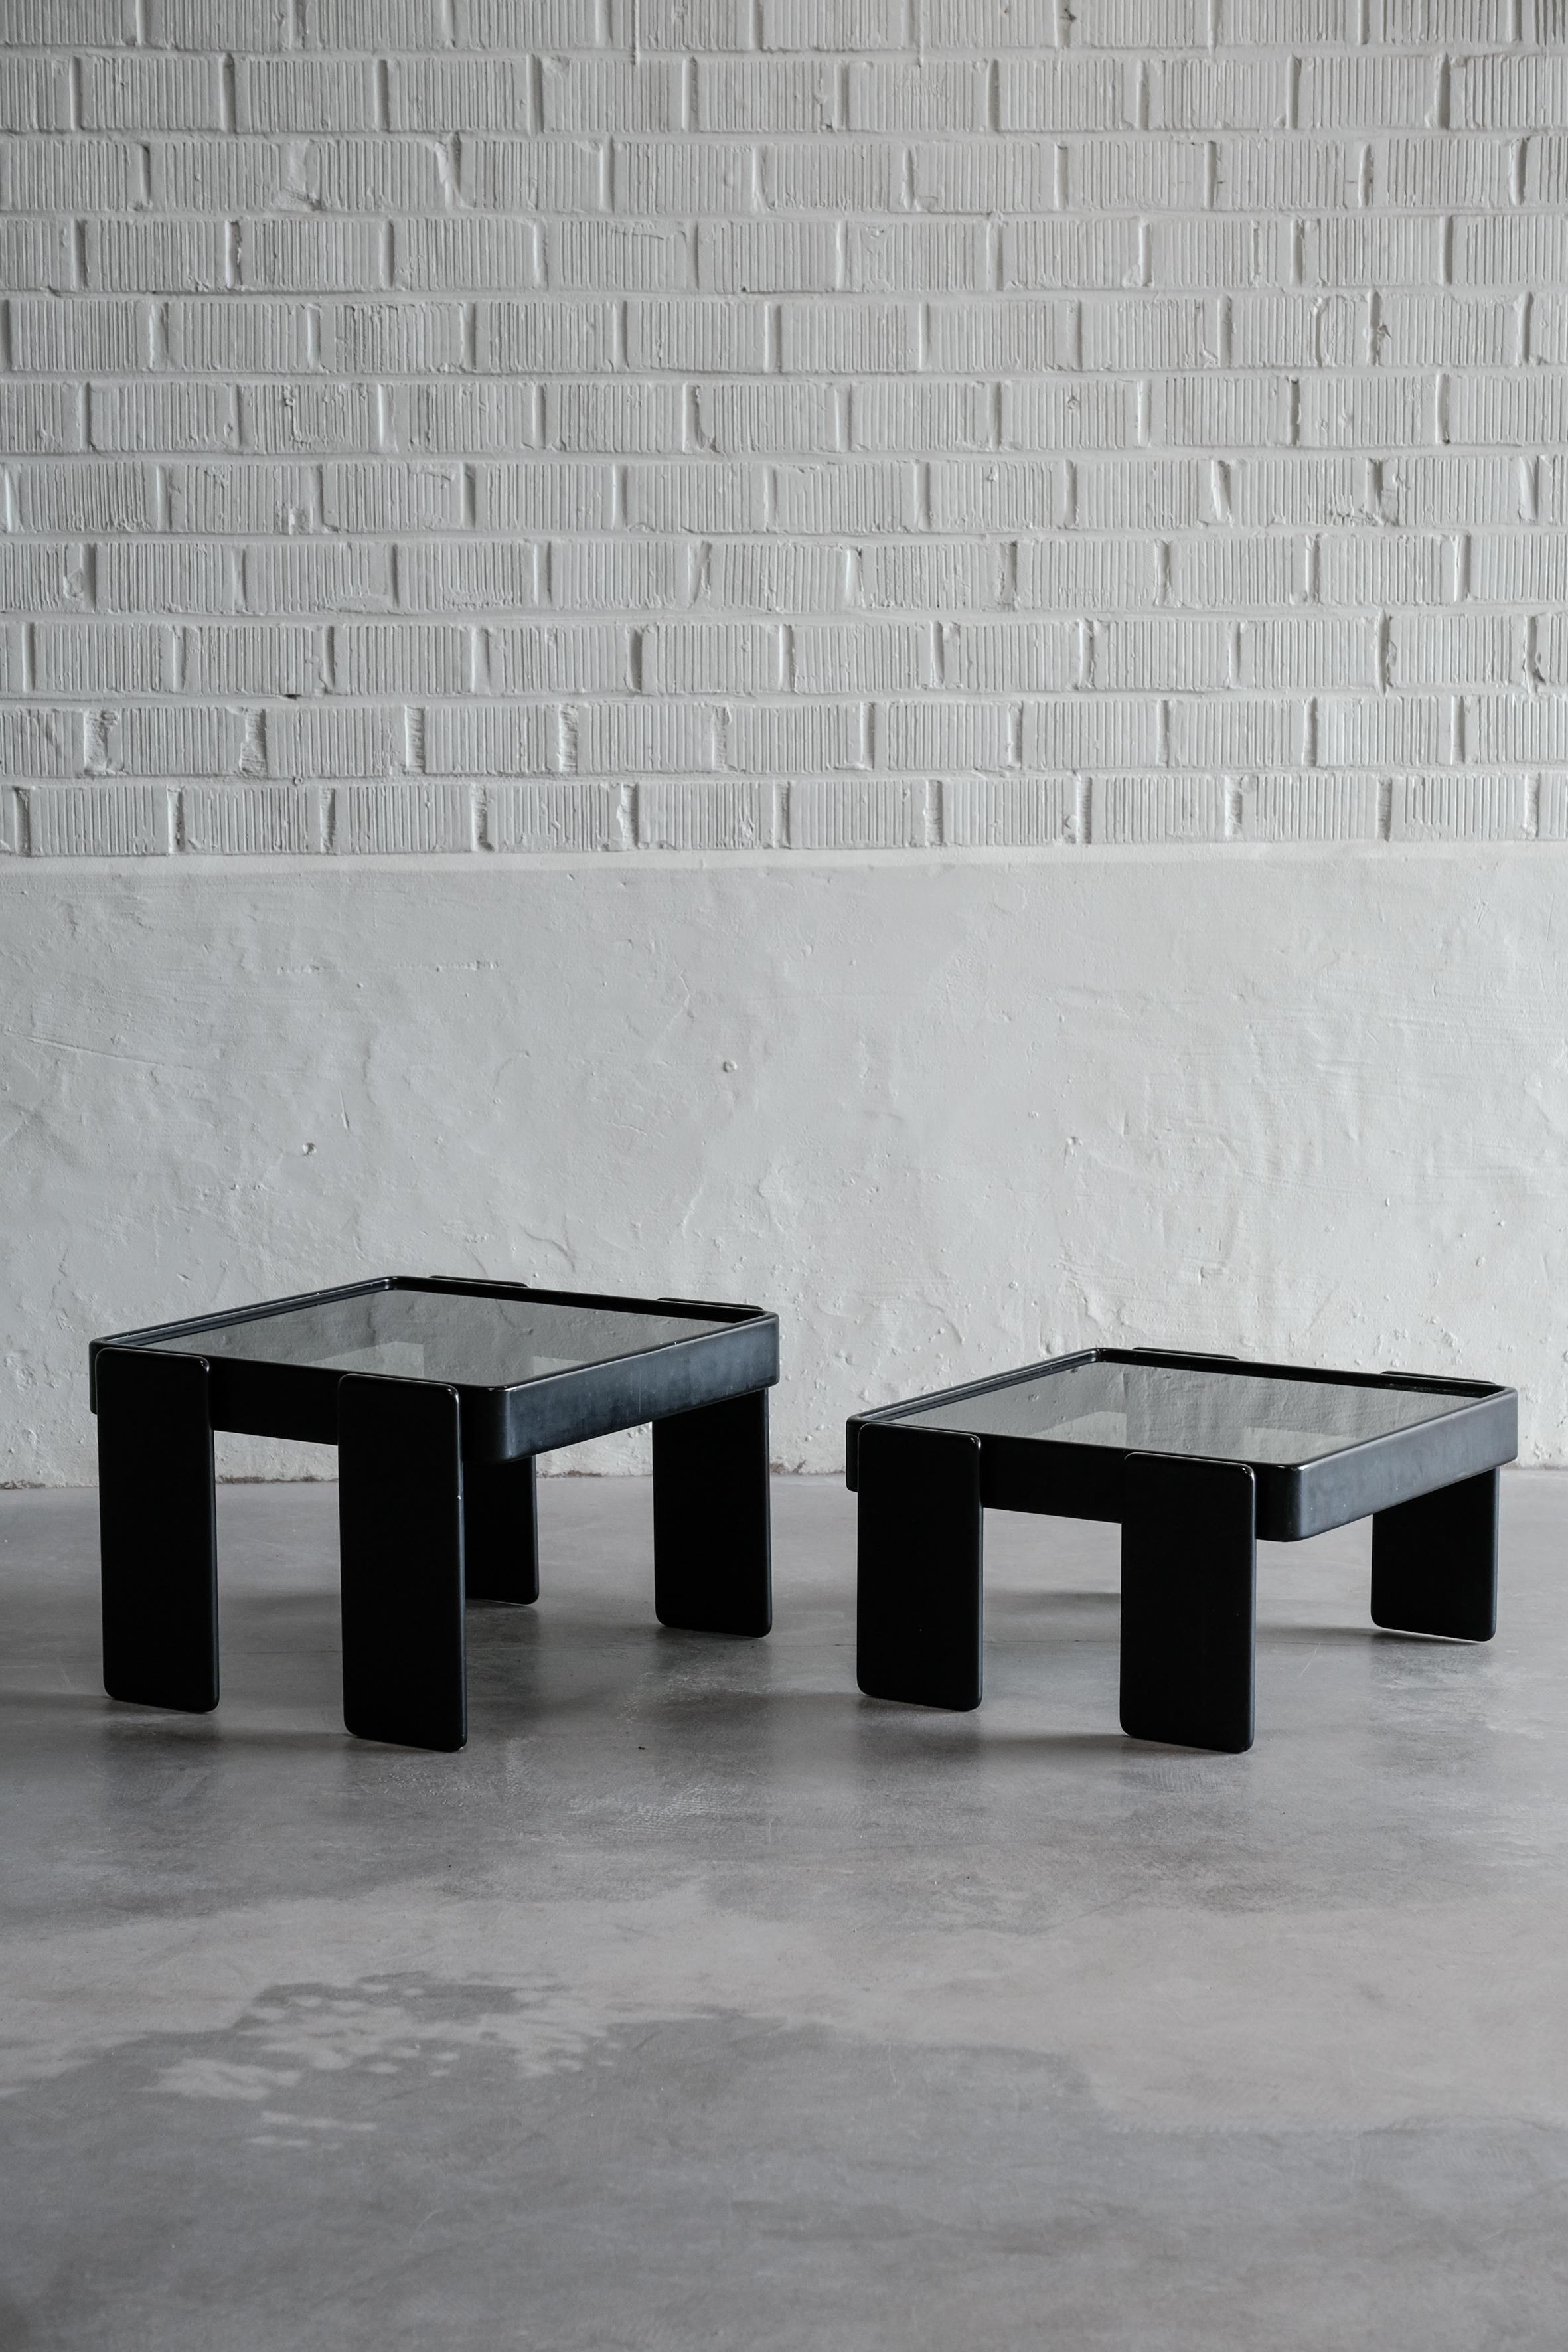 Elegant Pair of Side Tables by Gianfranco Frattini for Cassina in Lacquered Wood.

The glass tops exhibit some scratches and the wood shows minor damages, as depicted in the accompanying pictures, these imperfections do little to detract from the